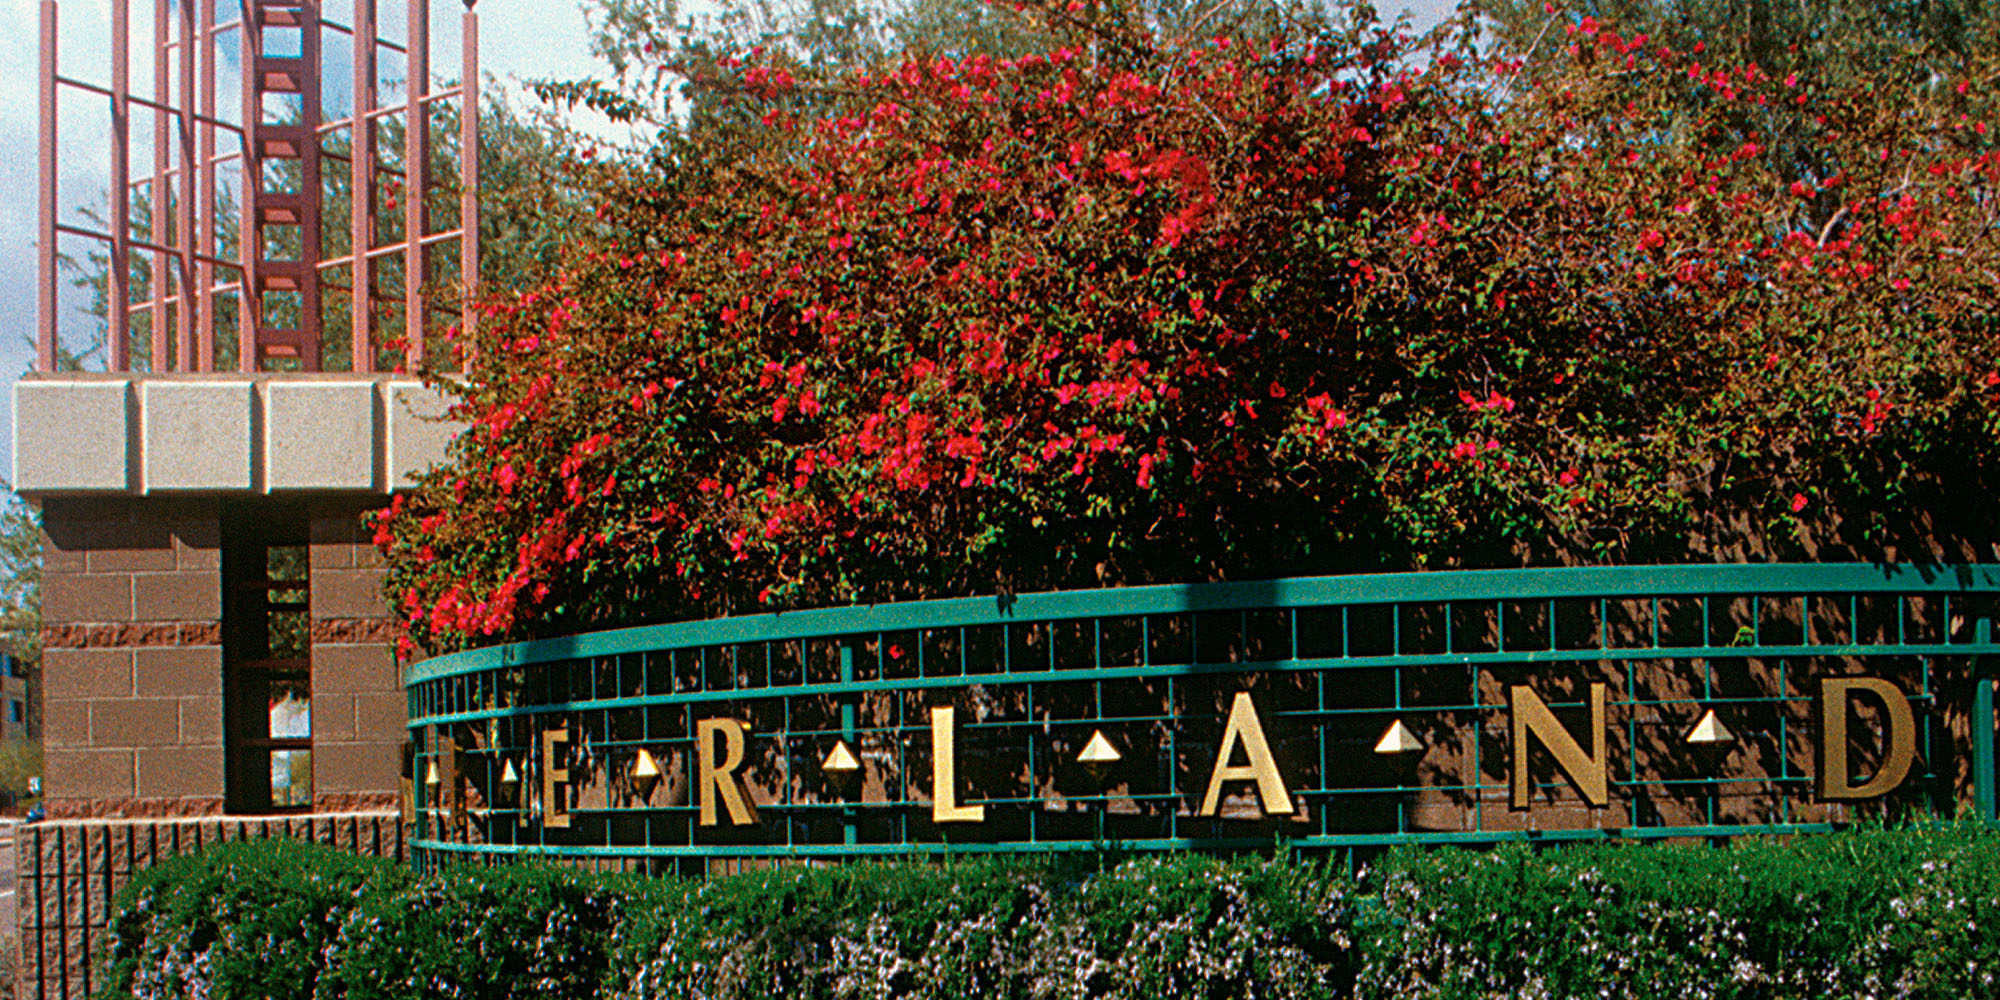 kierland sign and red flowers